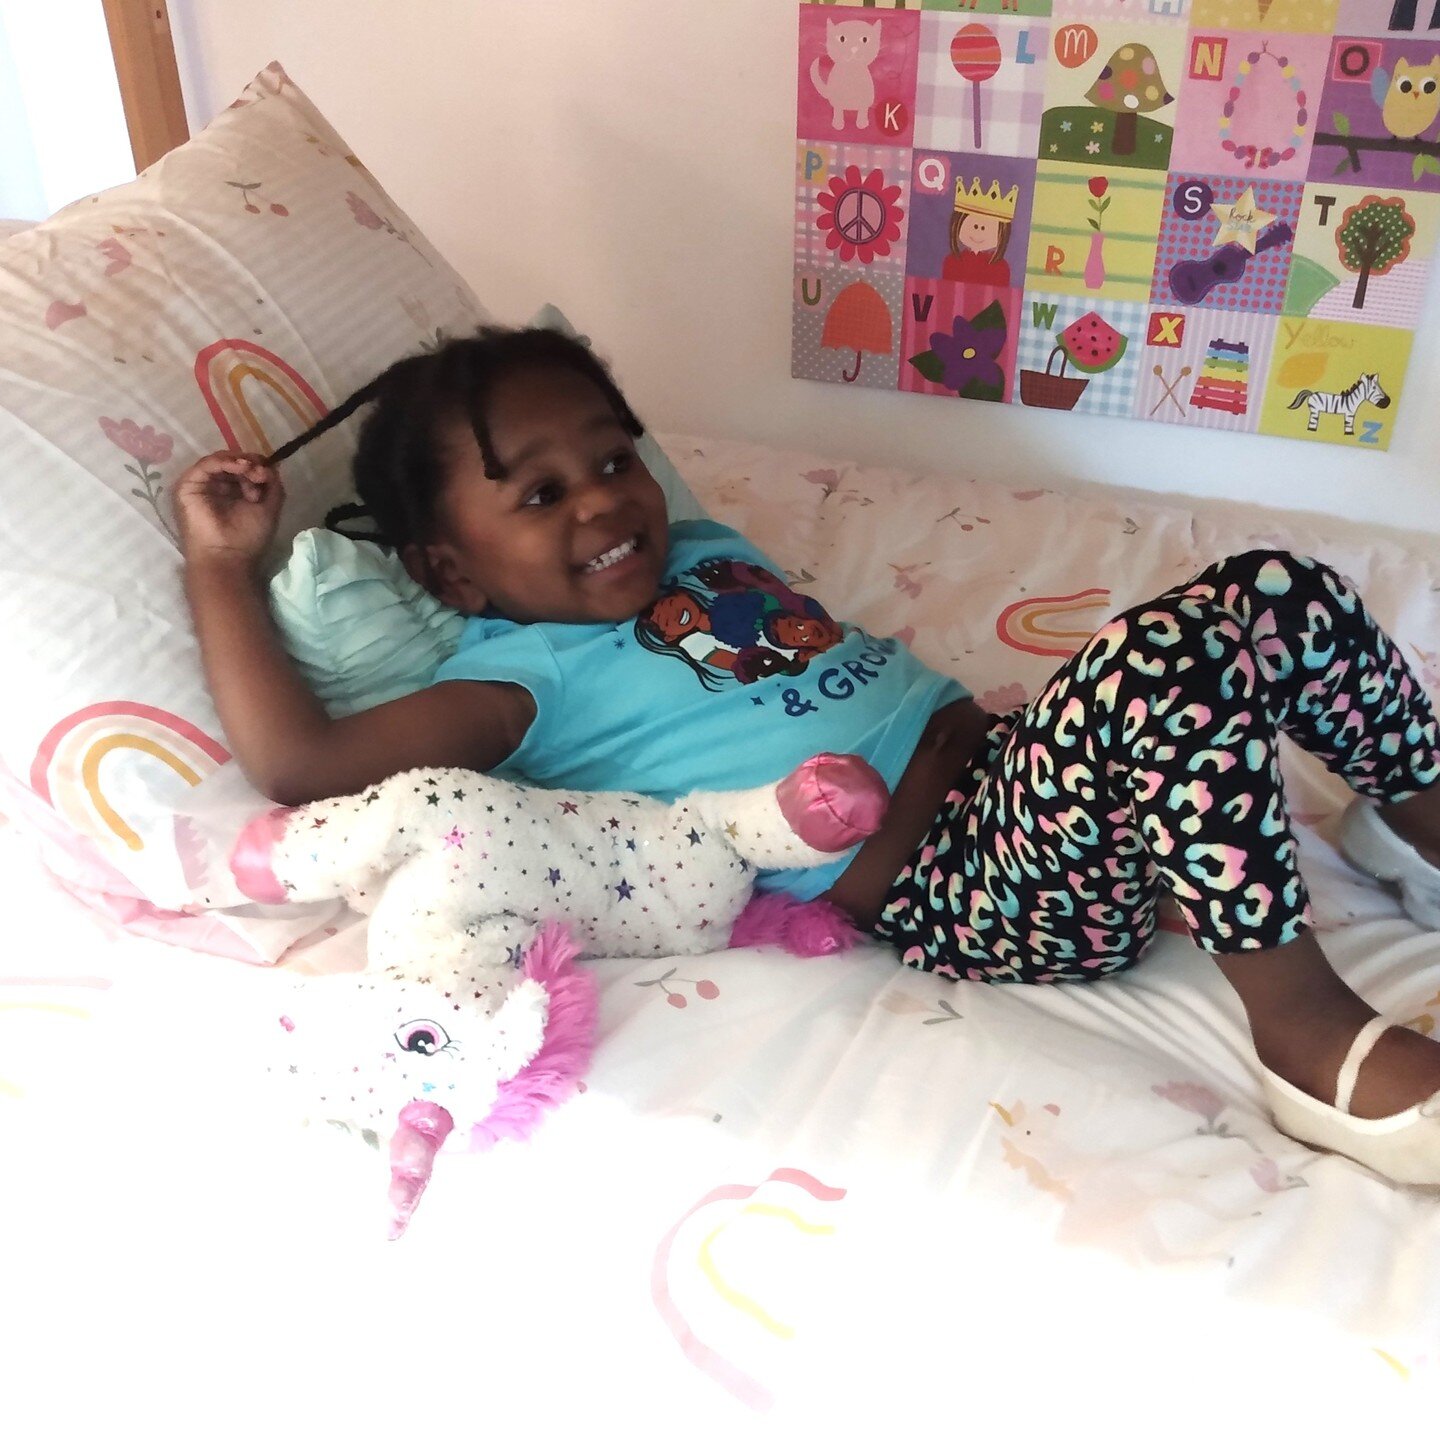 Mom + 4 kids + new beds of their own = Welcome Home! 

Add in a new job offer for Ariana, and things are looking up for her and her family. Although her siblings were still in school during our reveal, little Amyla brought the joy for all of them. Af